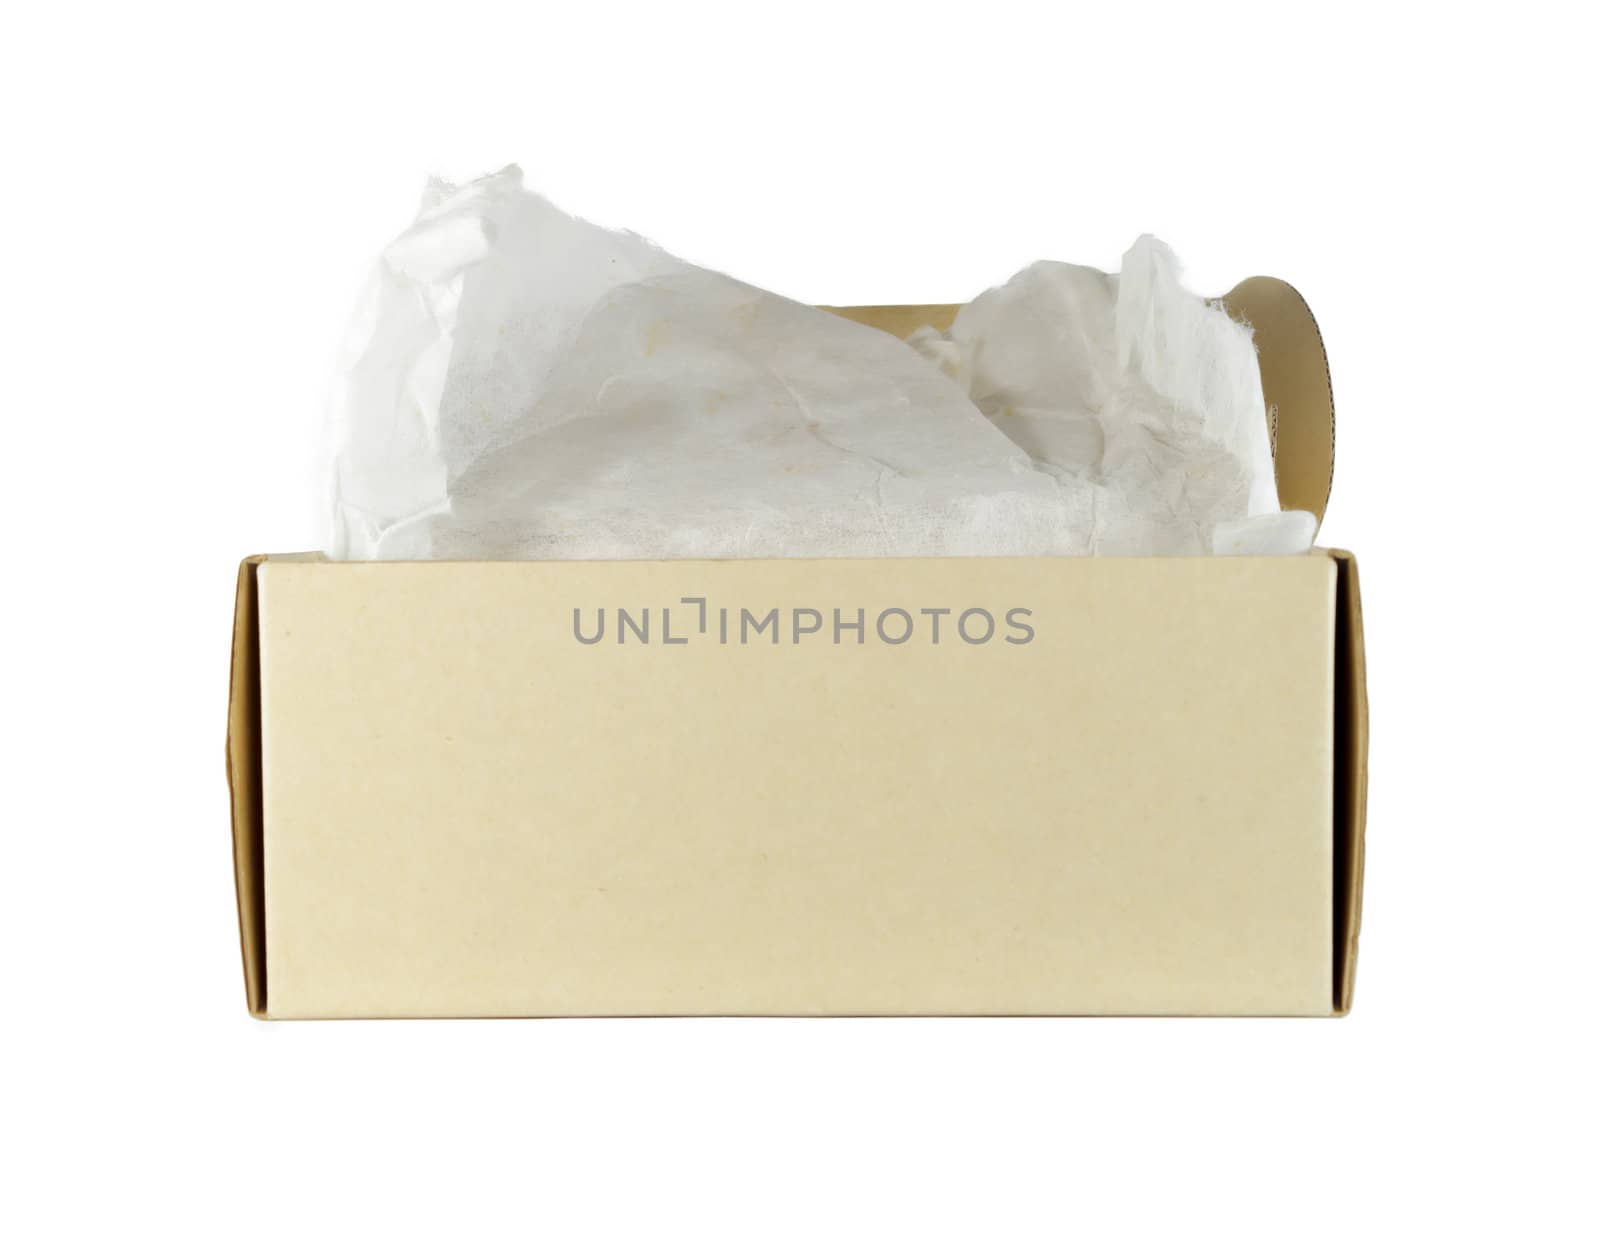 Closeup cardboard box, isolated on white background.